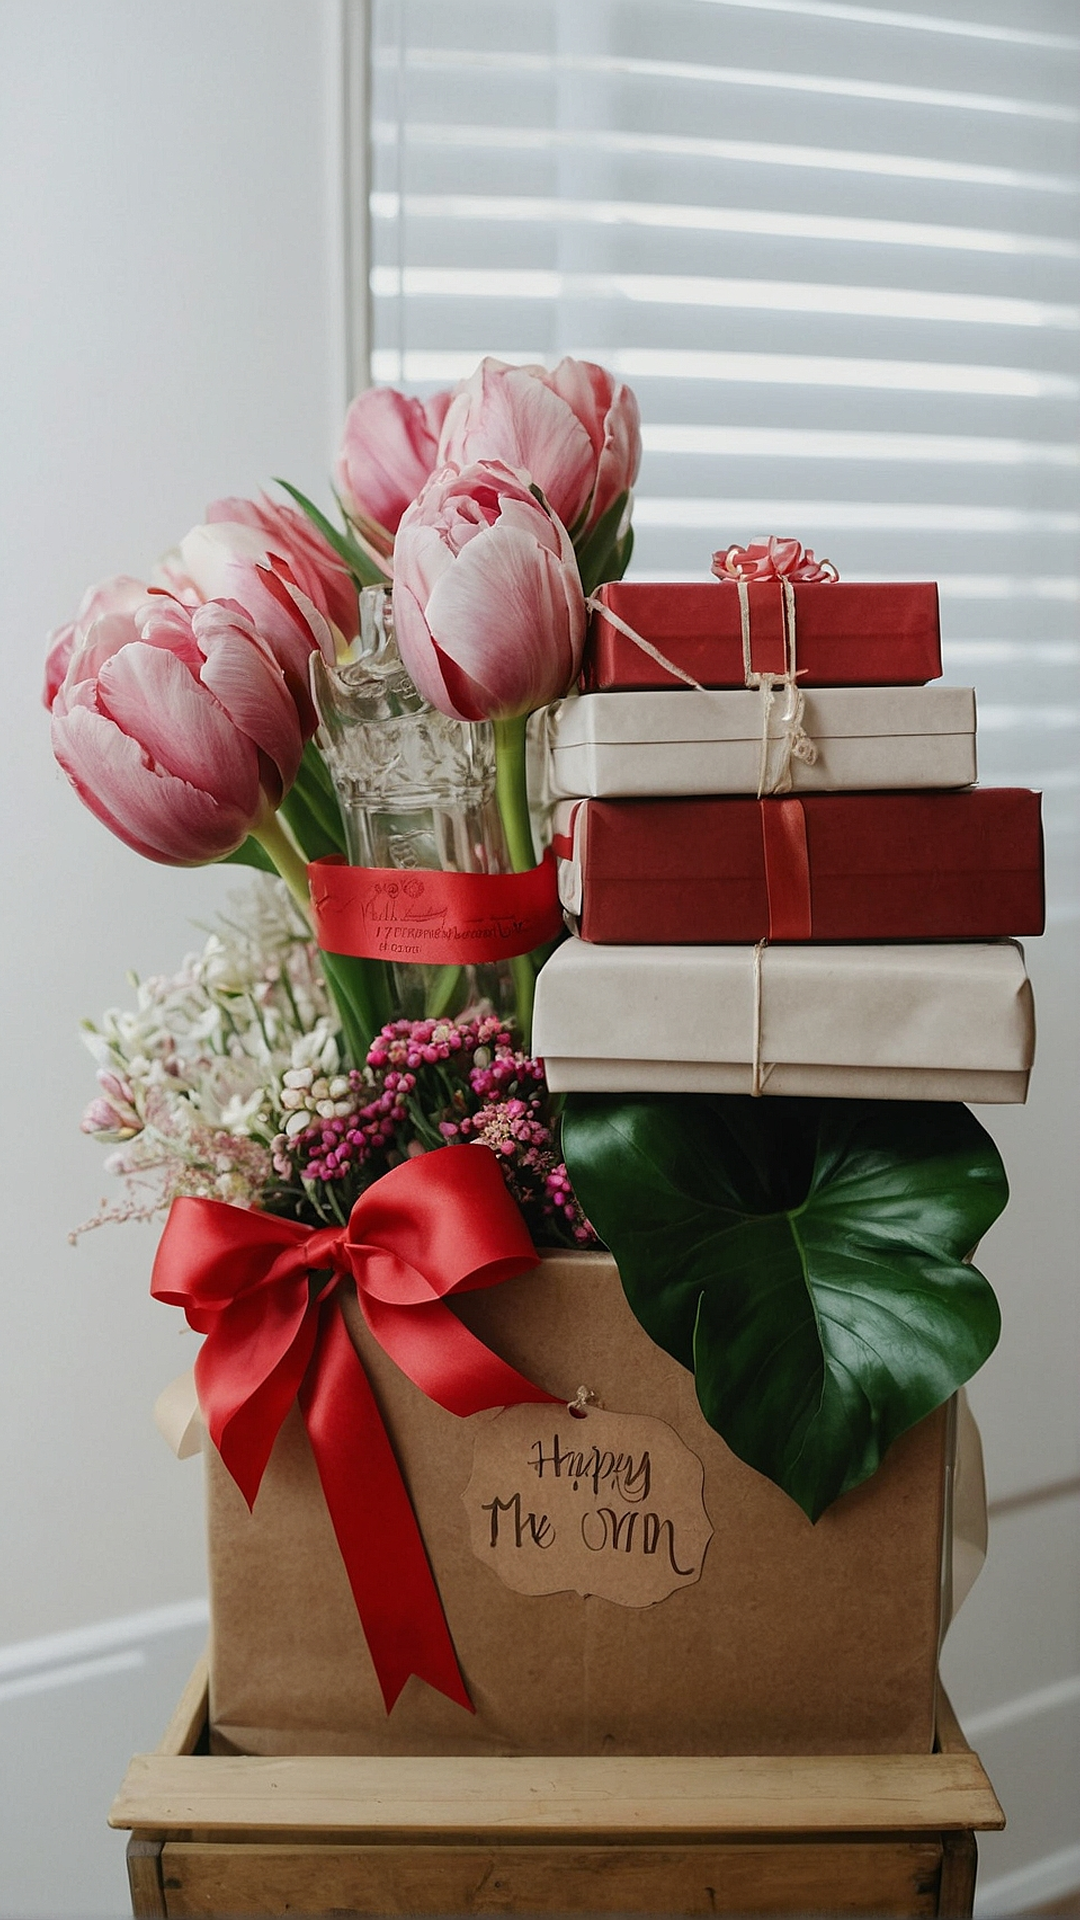 Elegant Home Decor Gifts for Mothers Day